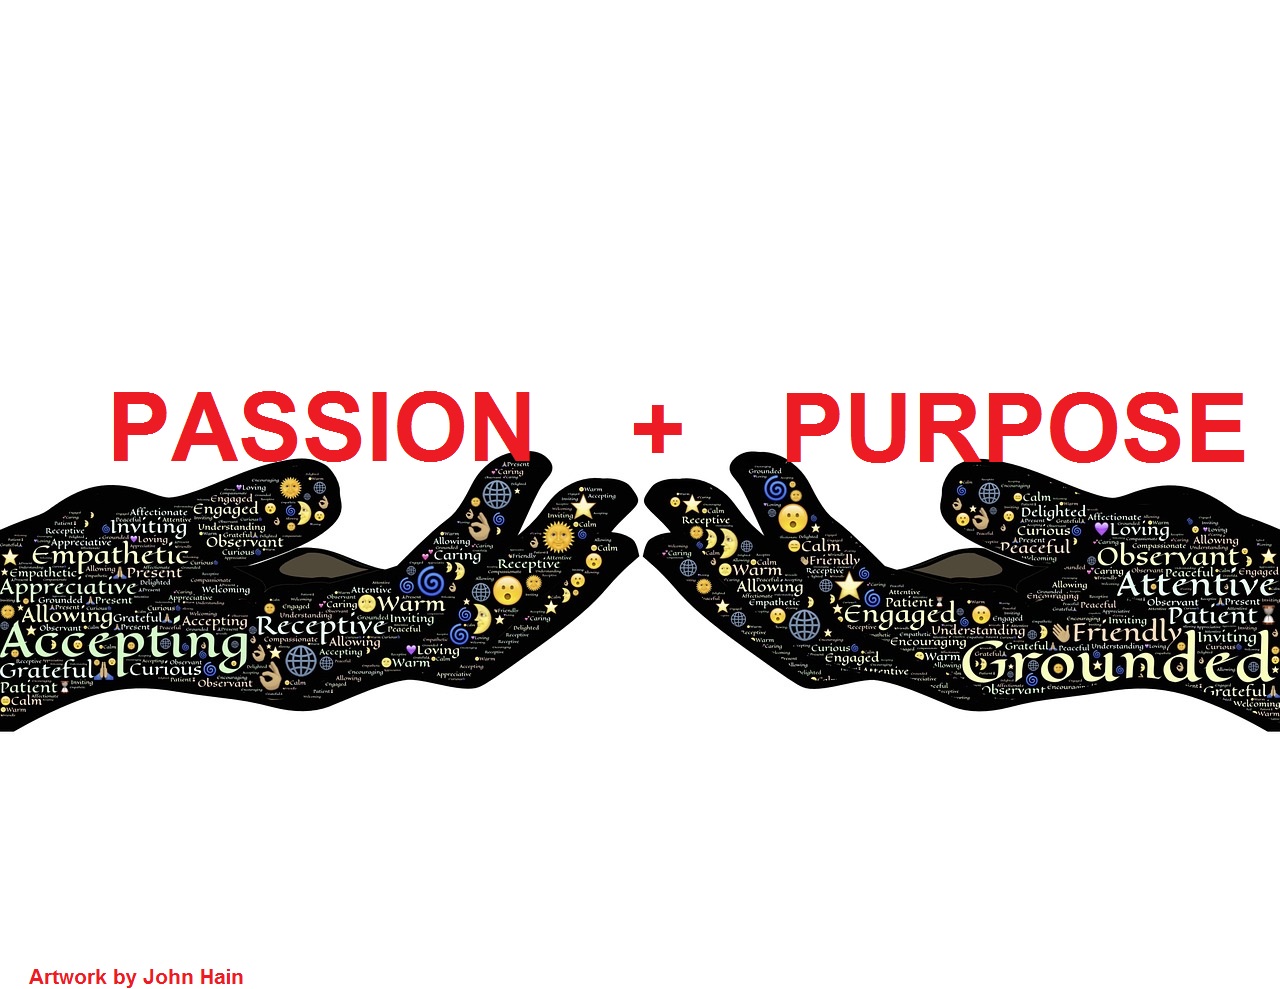 Passion and purpose are in your hands